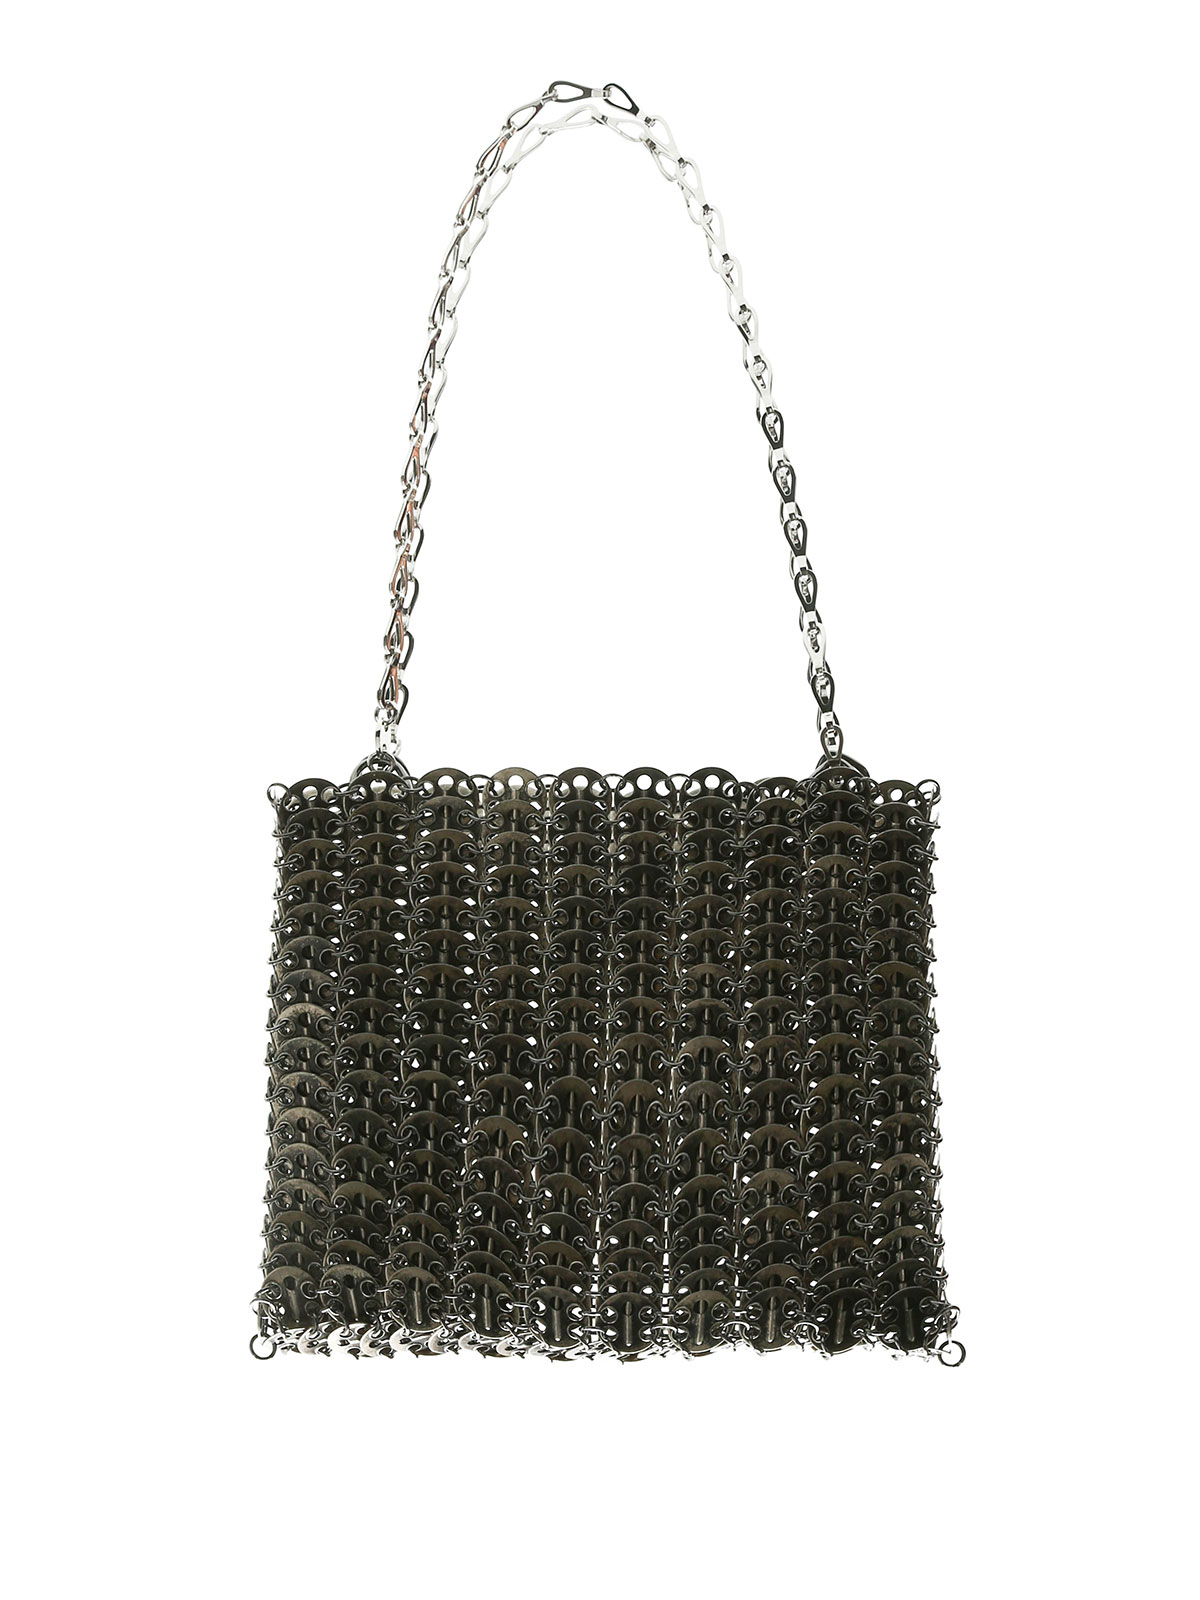 Paco Rabanne - Iconic bag - shoulder bags - ICONICME01TO19 | iKRIX.com